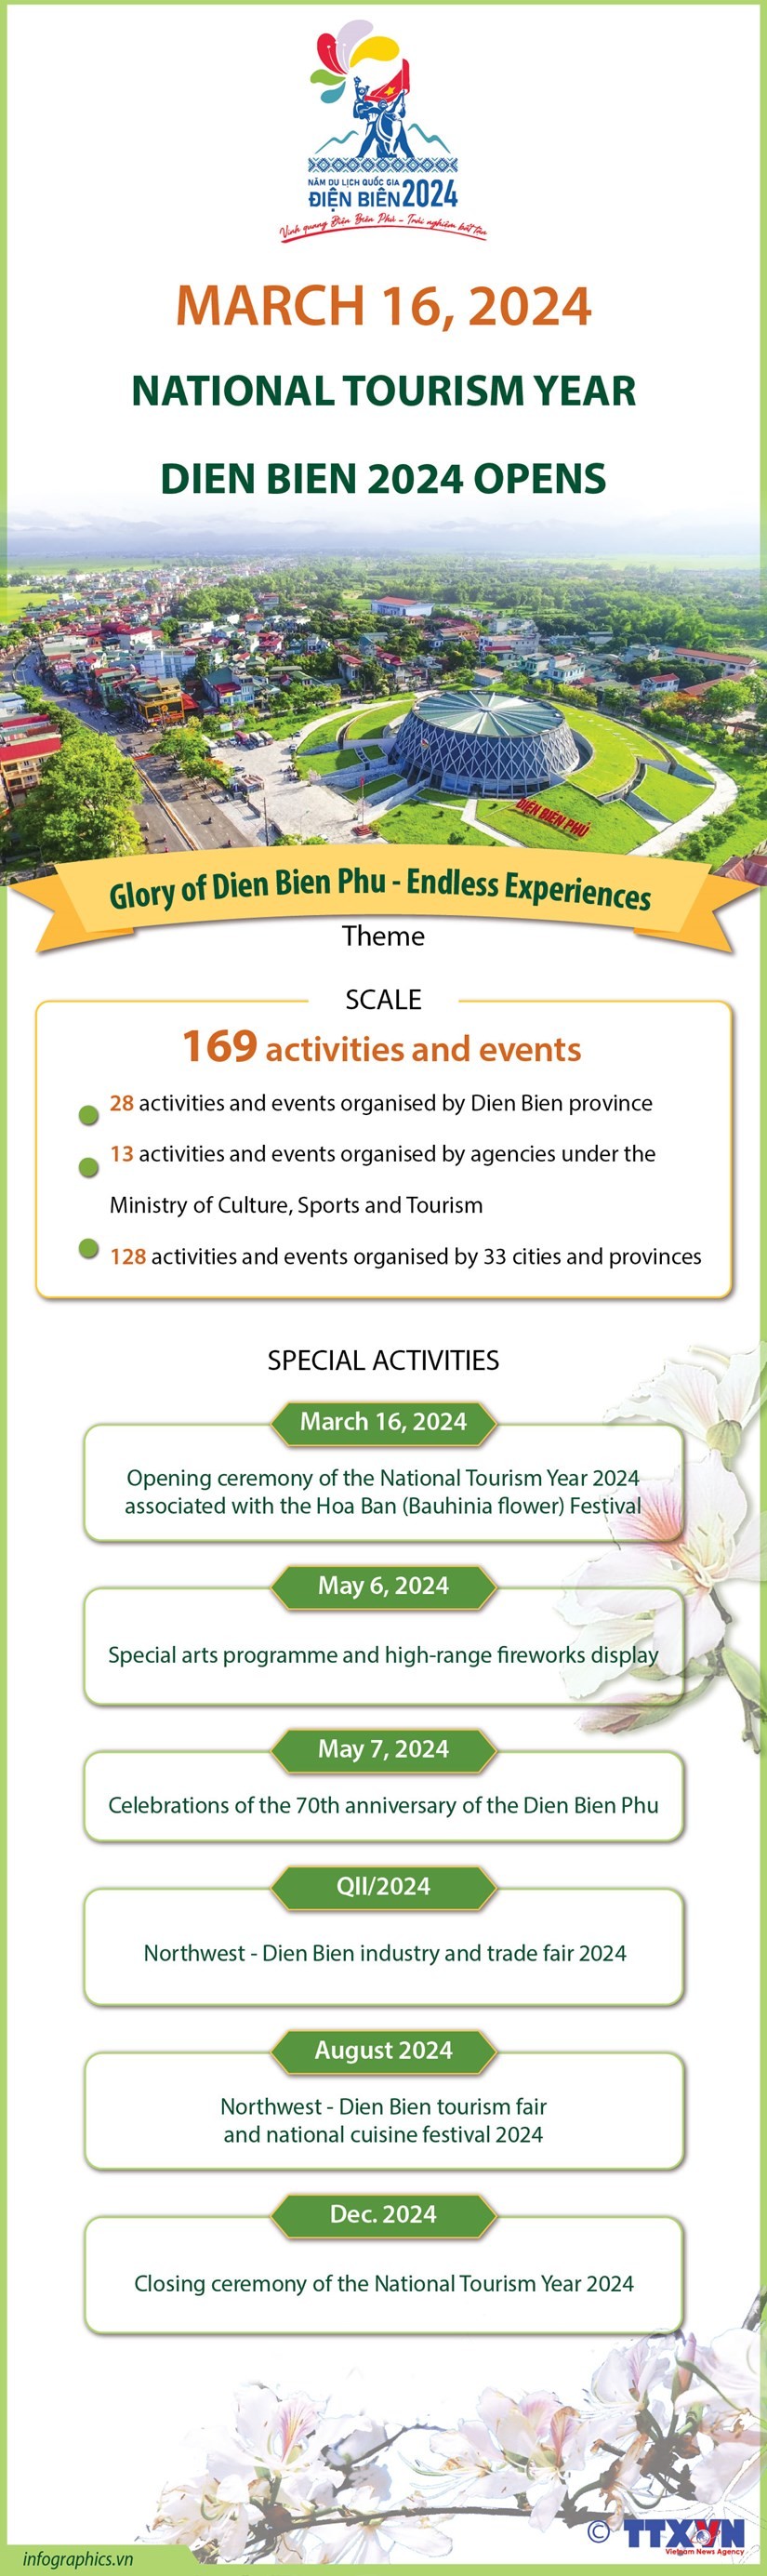 Dien Bien expecting breakthroughs from National Tourism Year 2024 